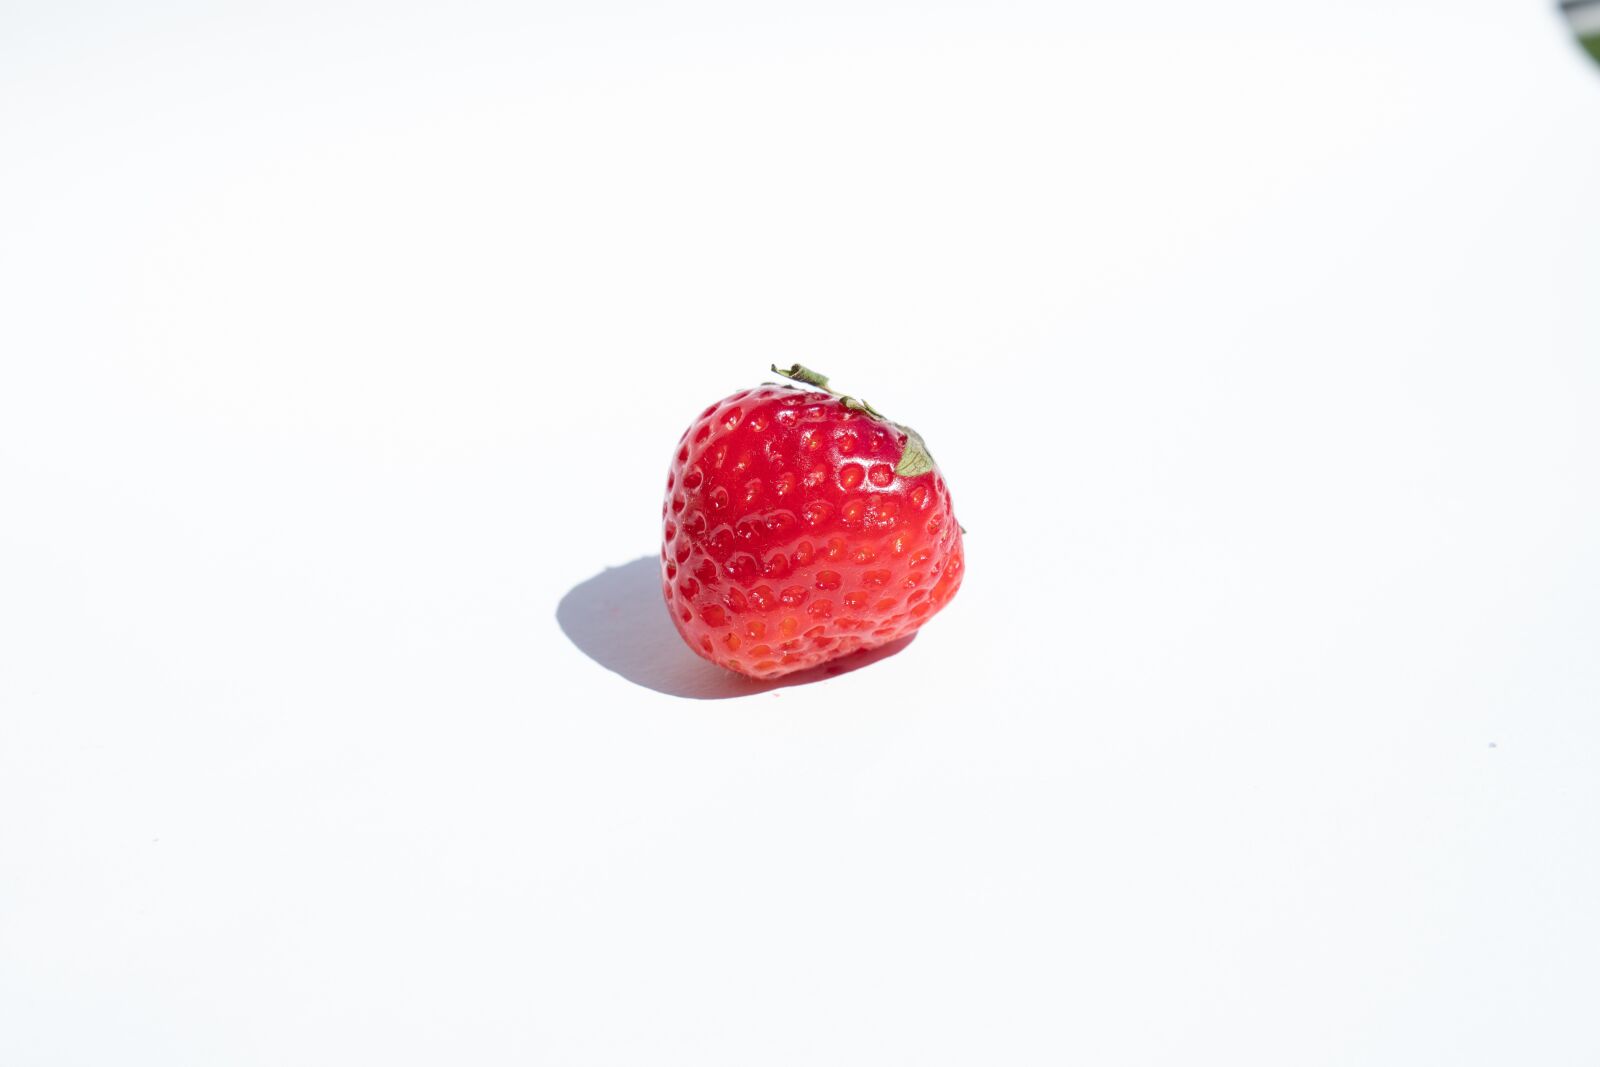 Sony a6500 sample photo. Strawberry, red, fruit photography